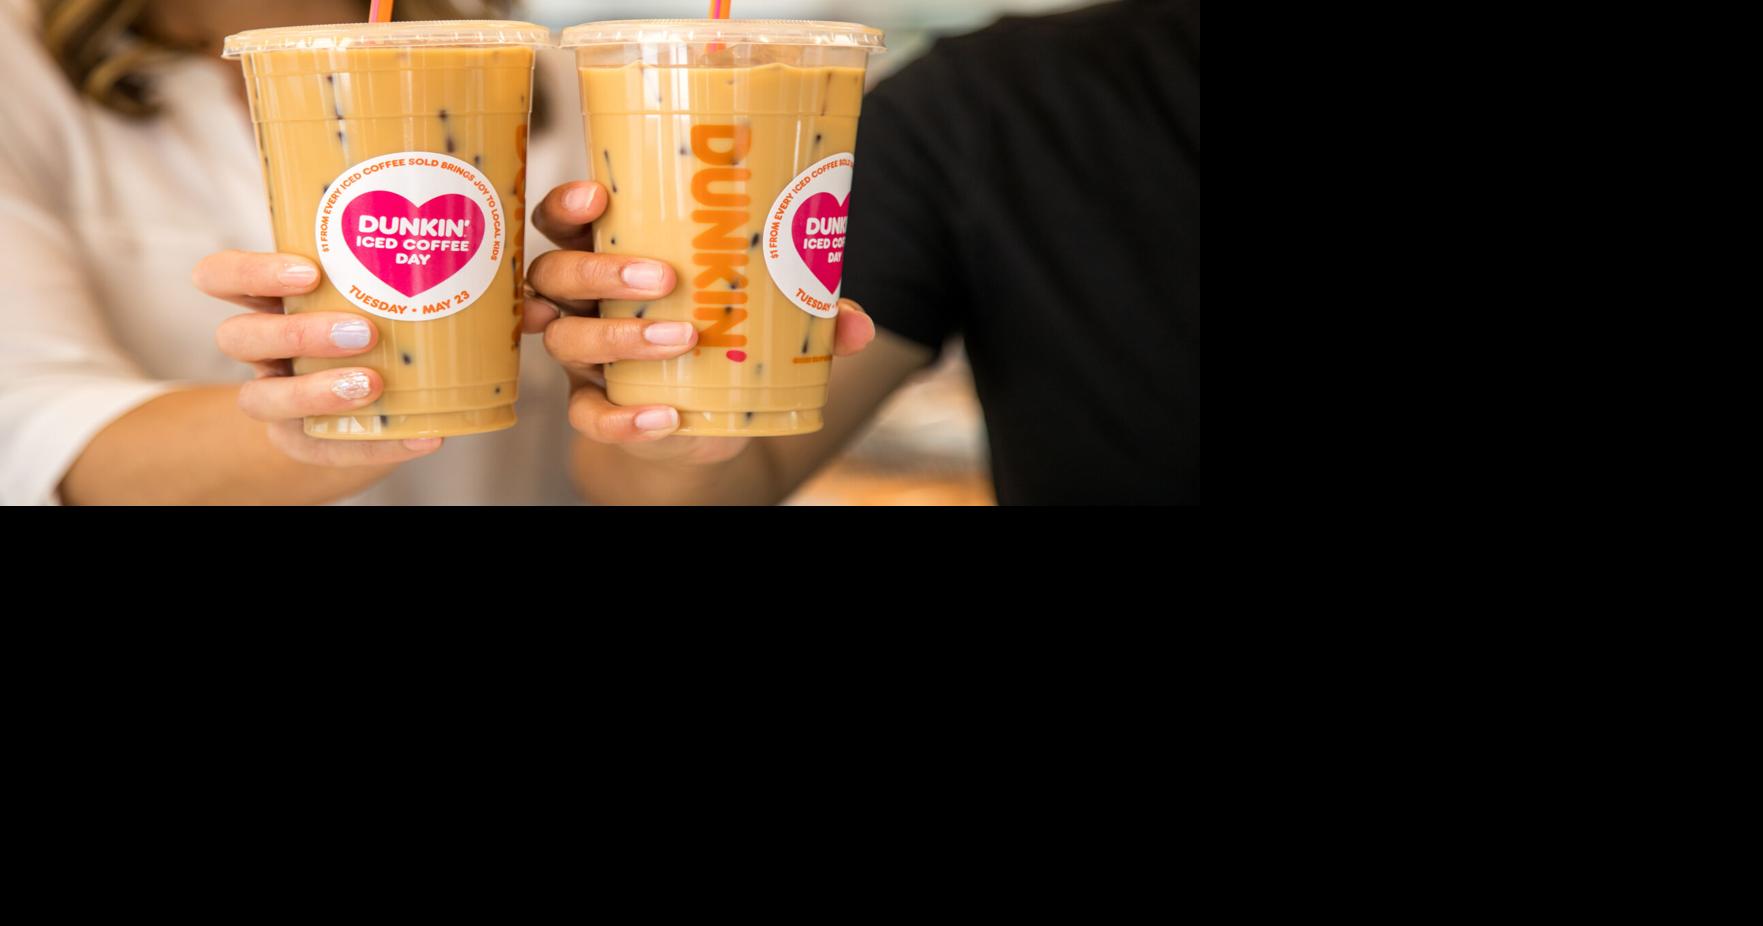 Dunkin’ Iced Coffee Day returns May 23 at participating locations